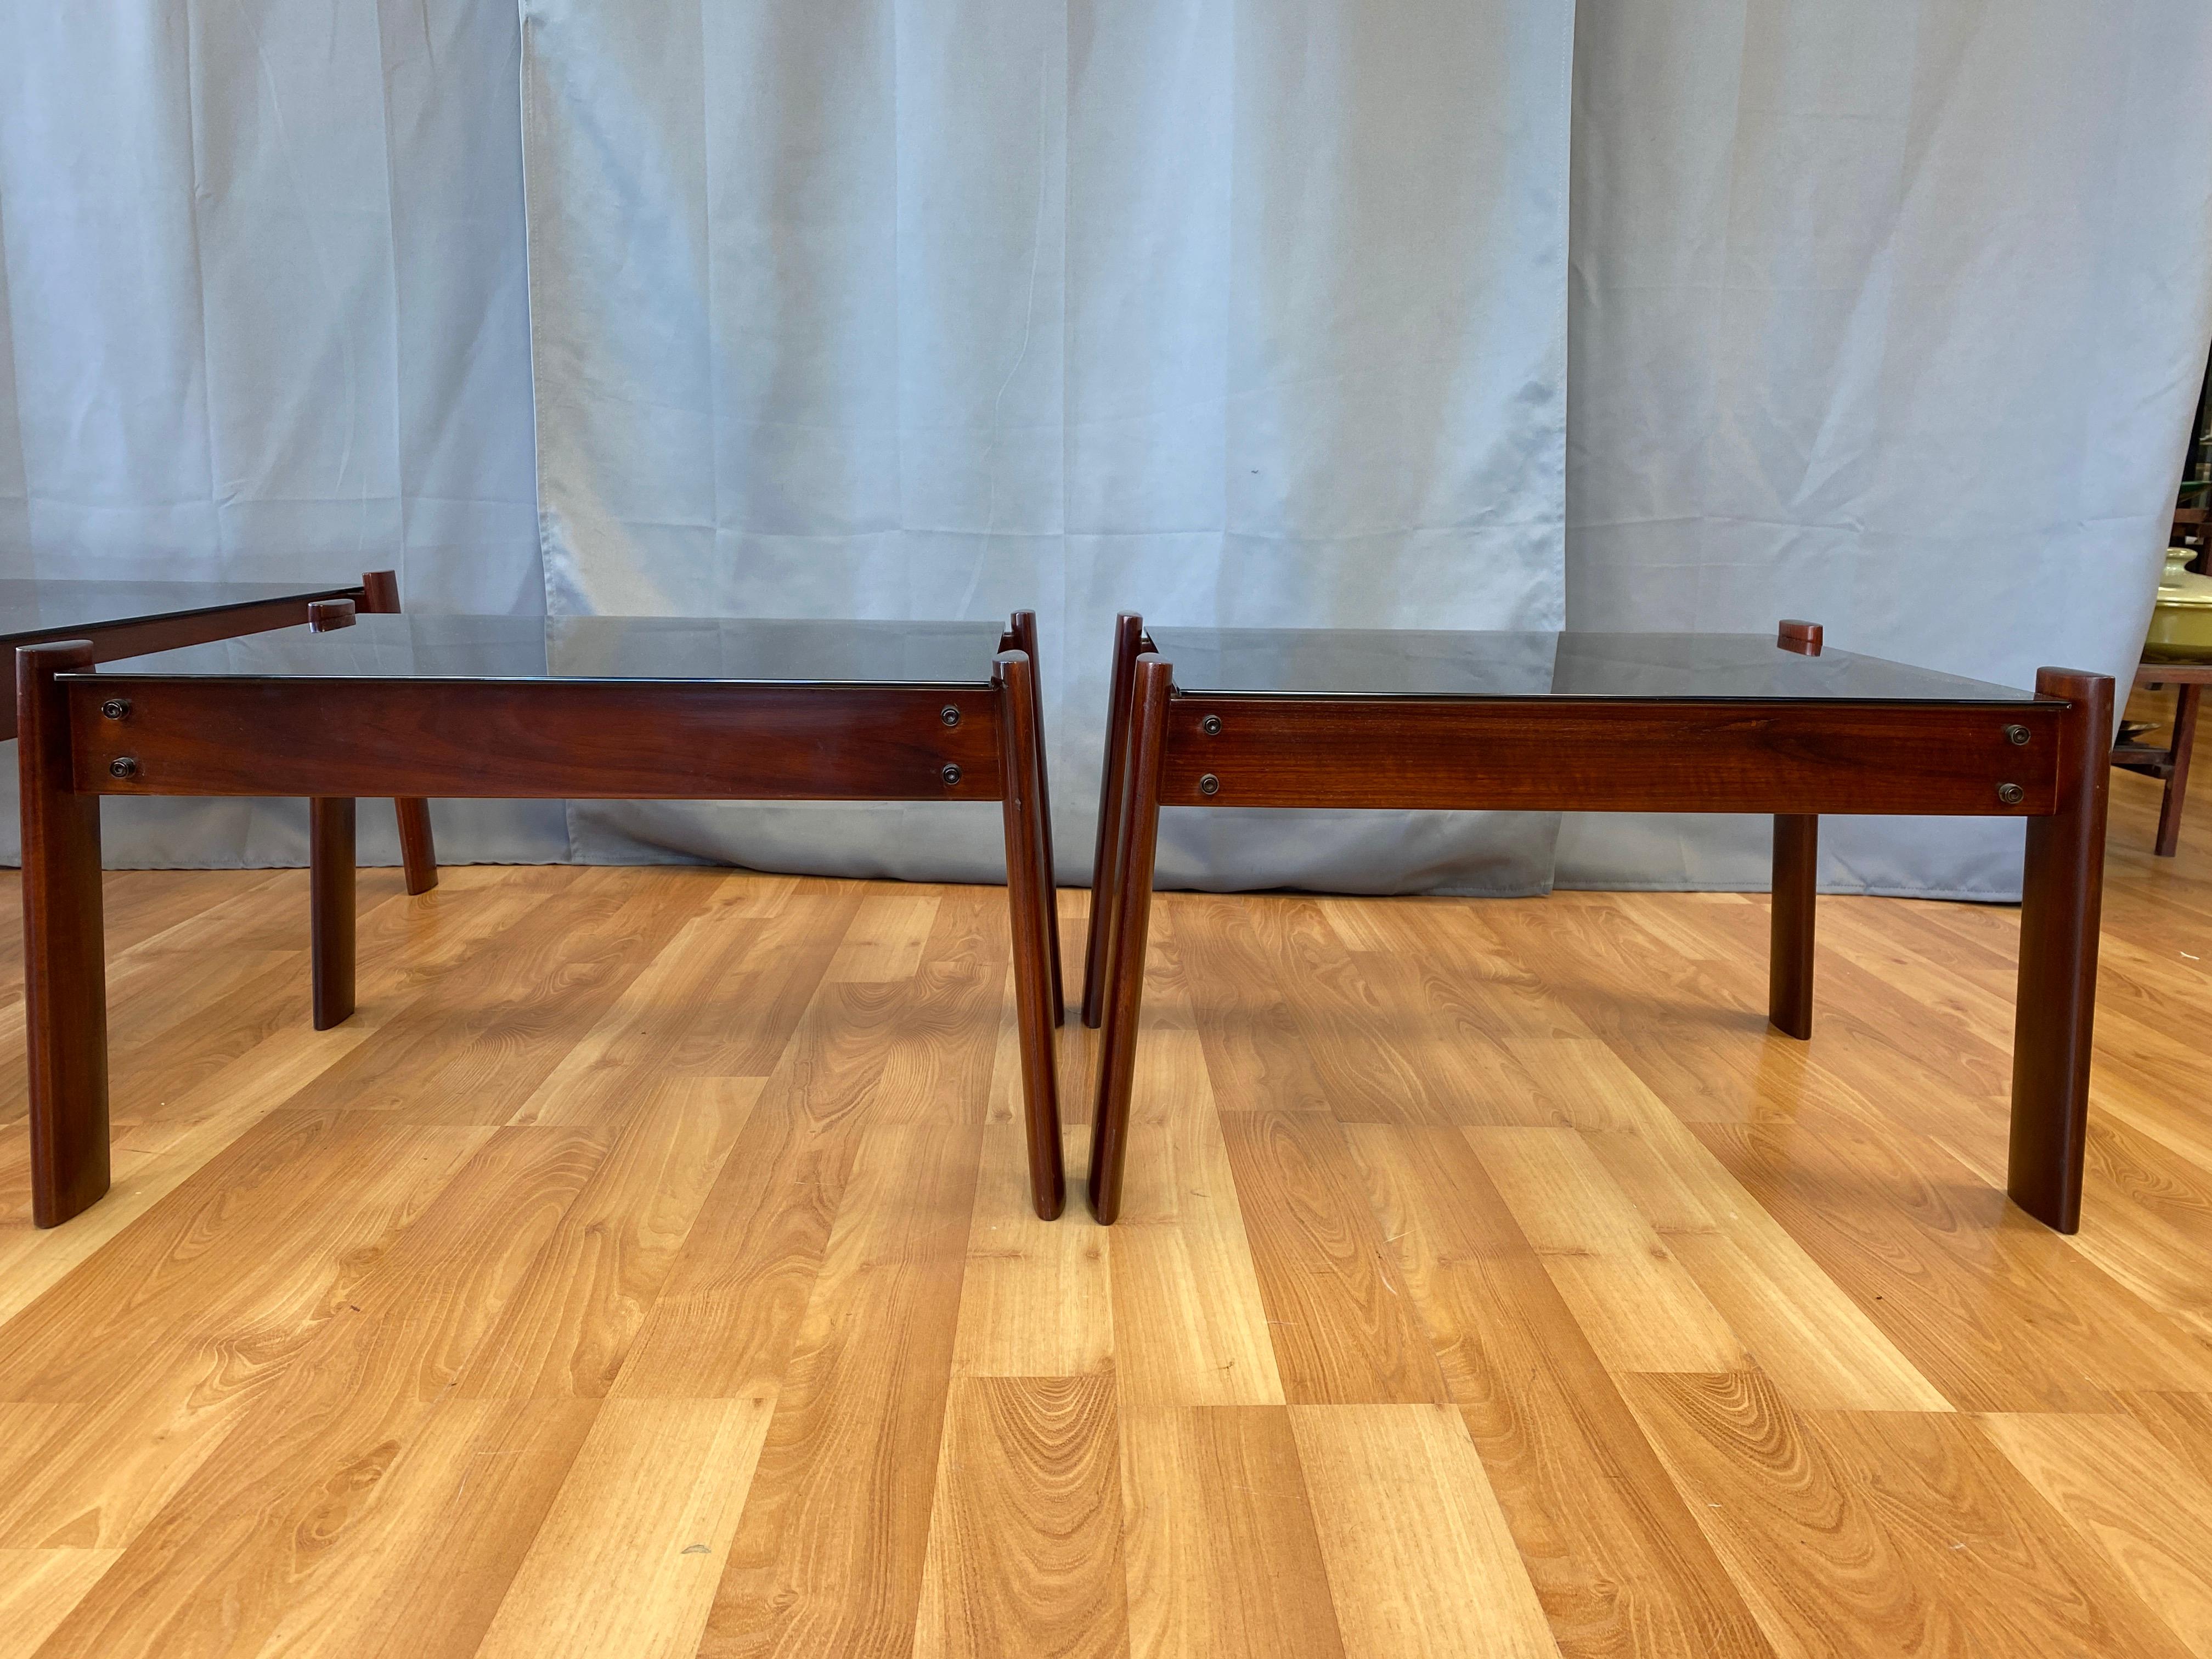 3-Piece Percival Lafer Designed Coffee and End Tables in Jacaranda Rosewood For Sale 1